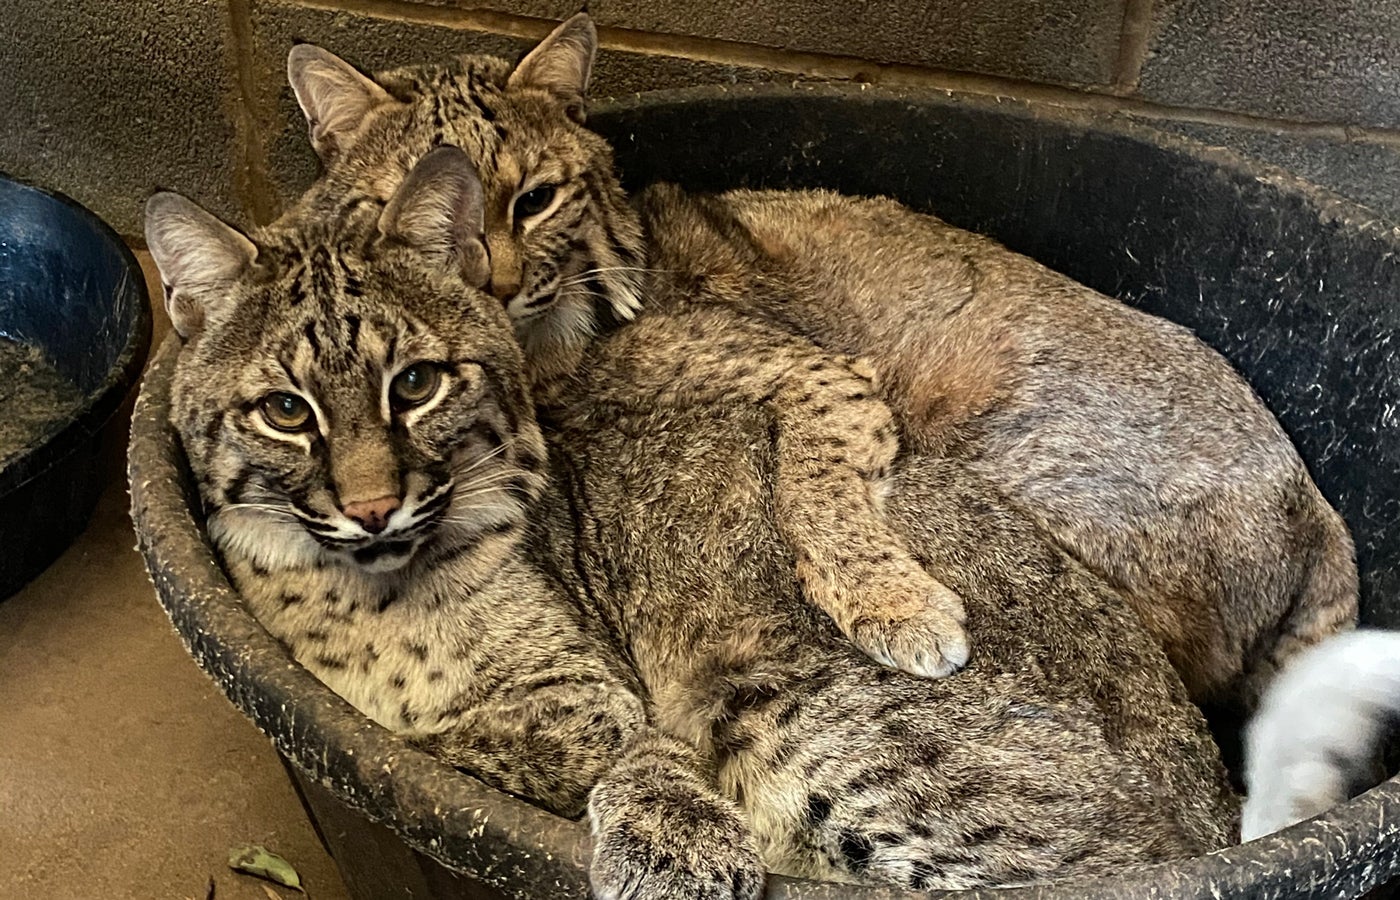 Bobcat Cheese and Yoda lay next to each other in a black circular tub. Yoda has his front leg on Cheese, in a cuddle-like position